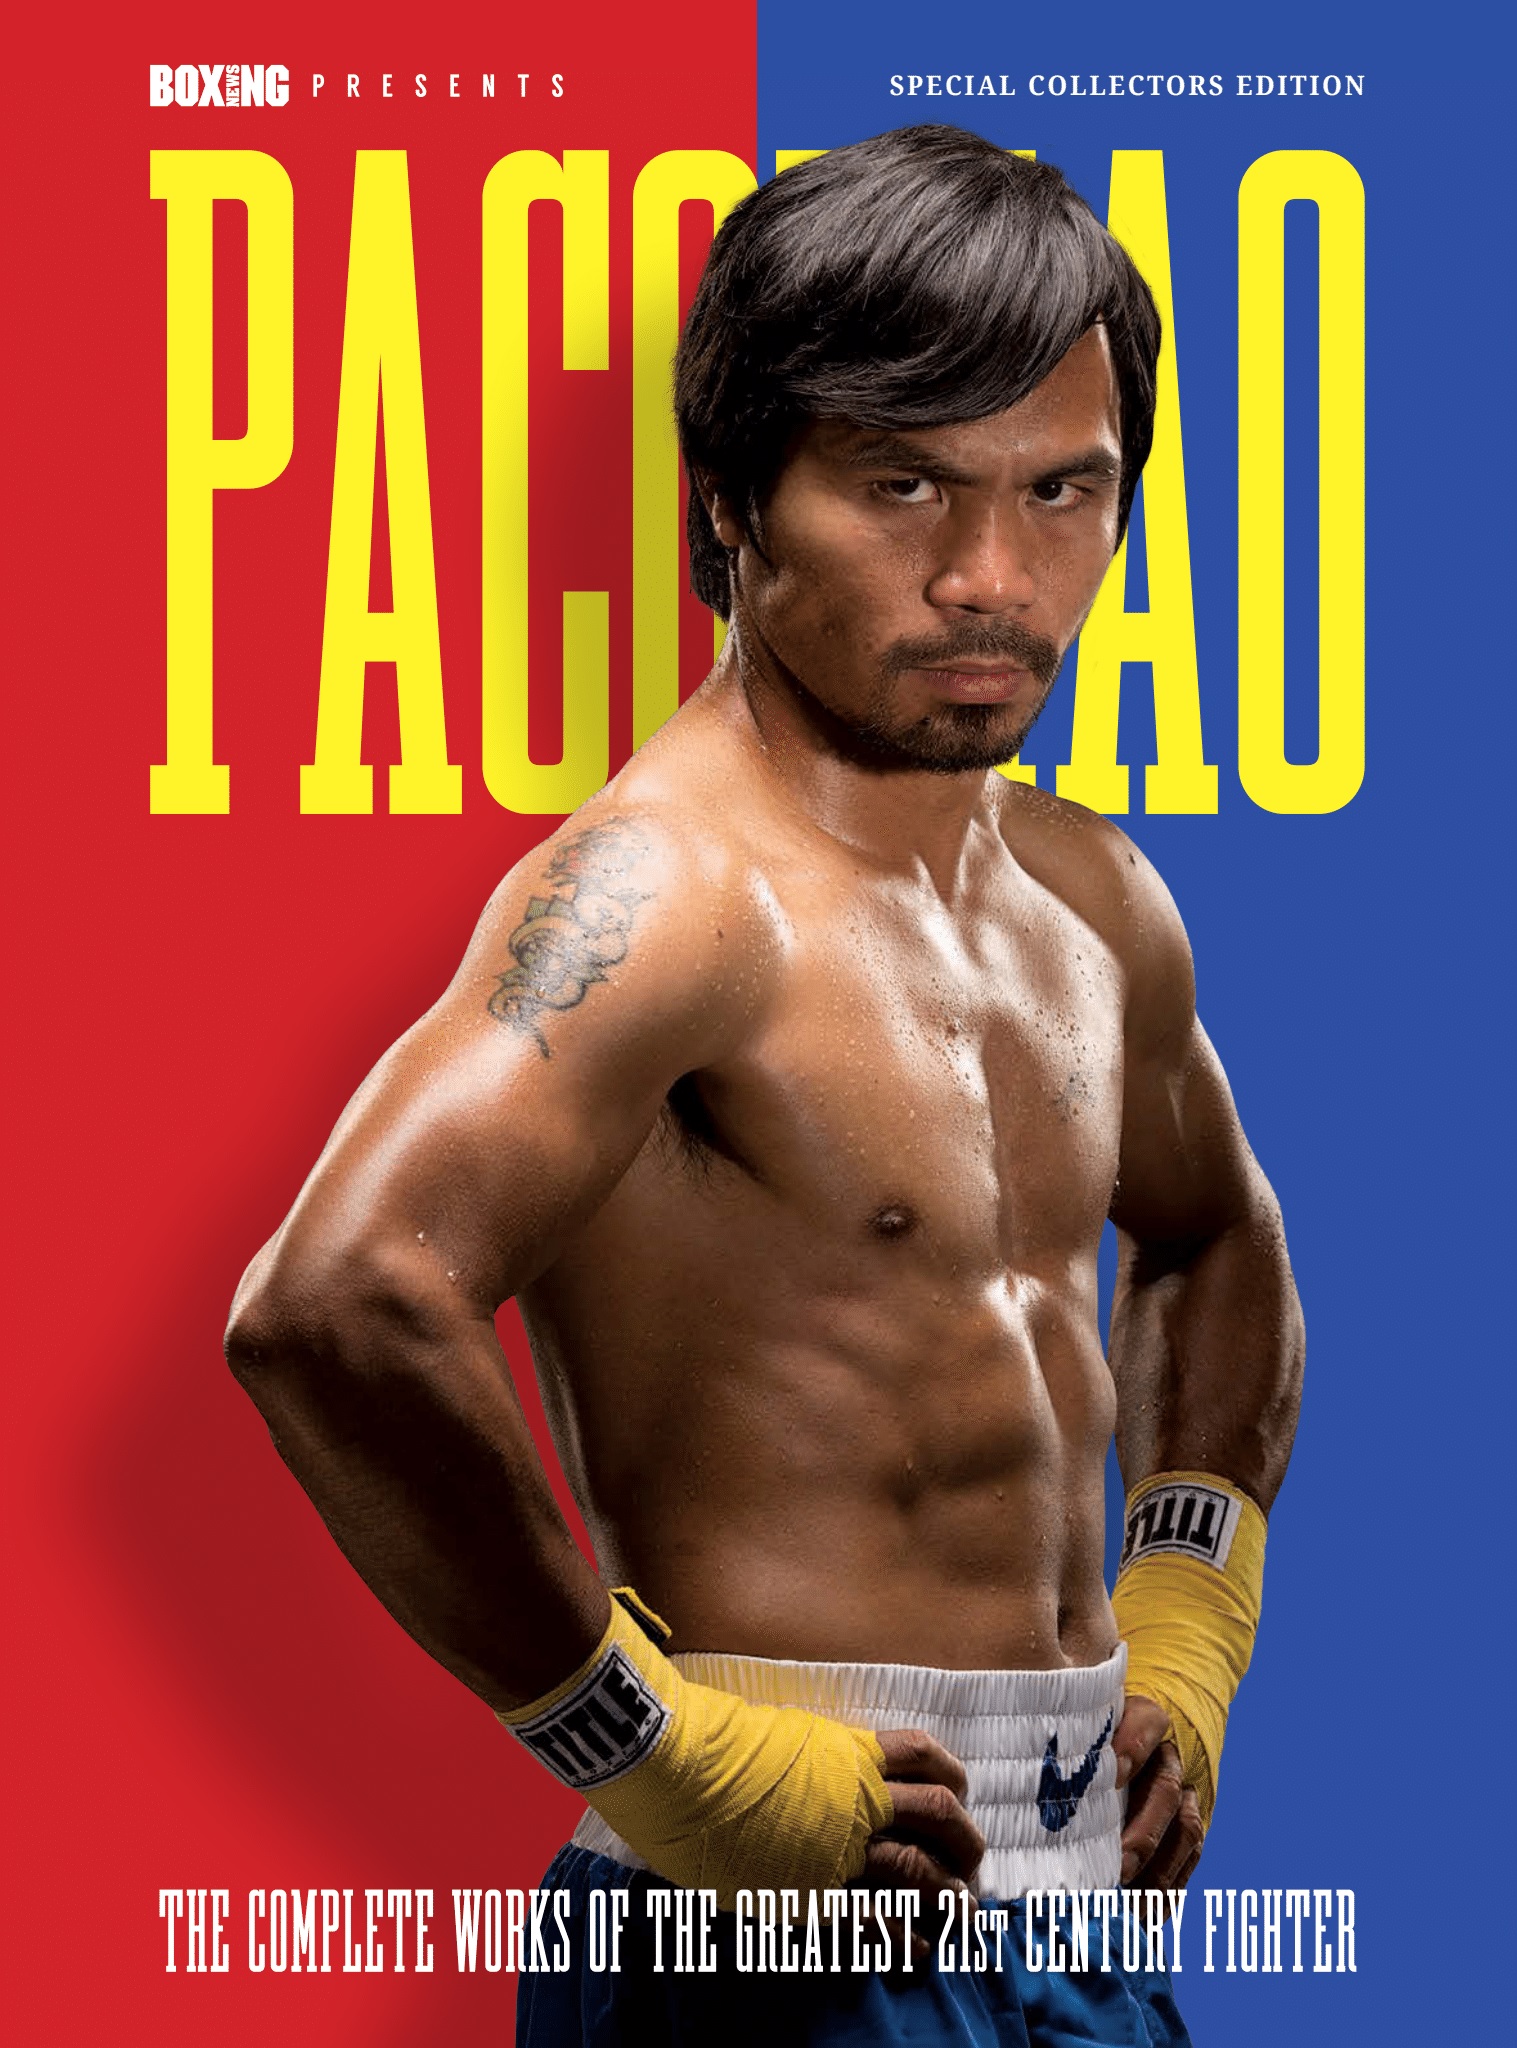 Boxing News Presents Issue 6 - Manny Pacquiao